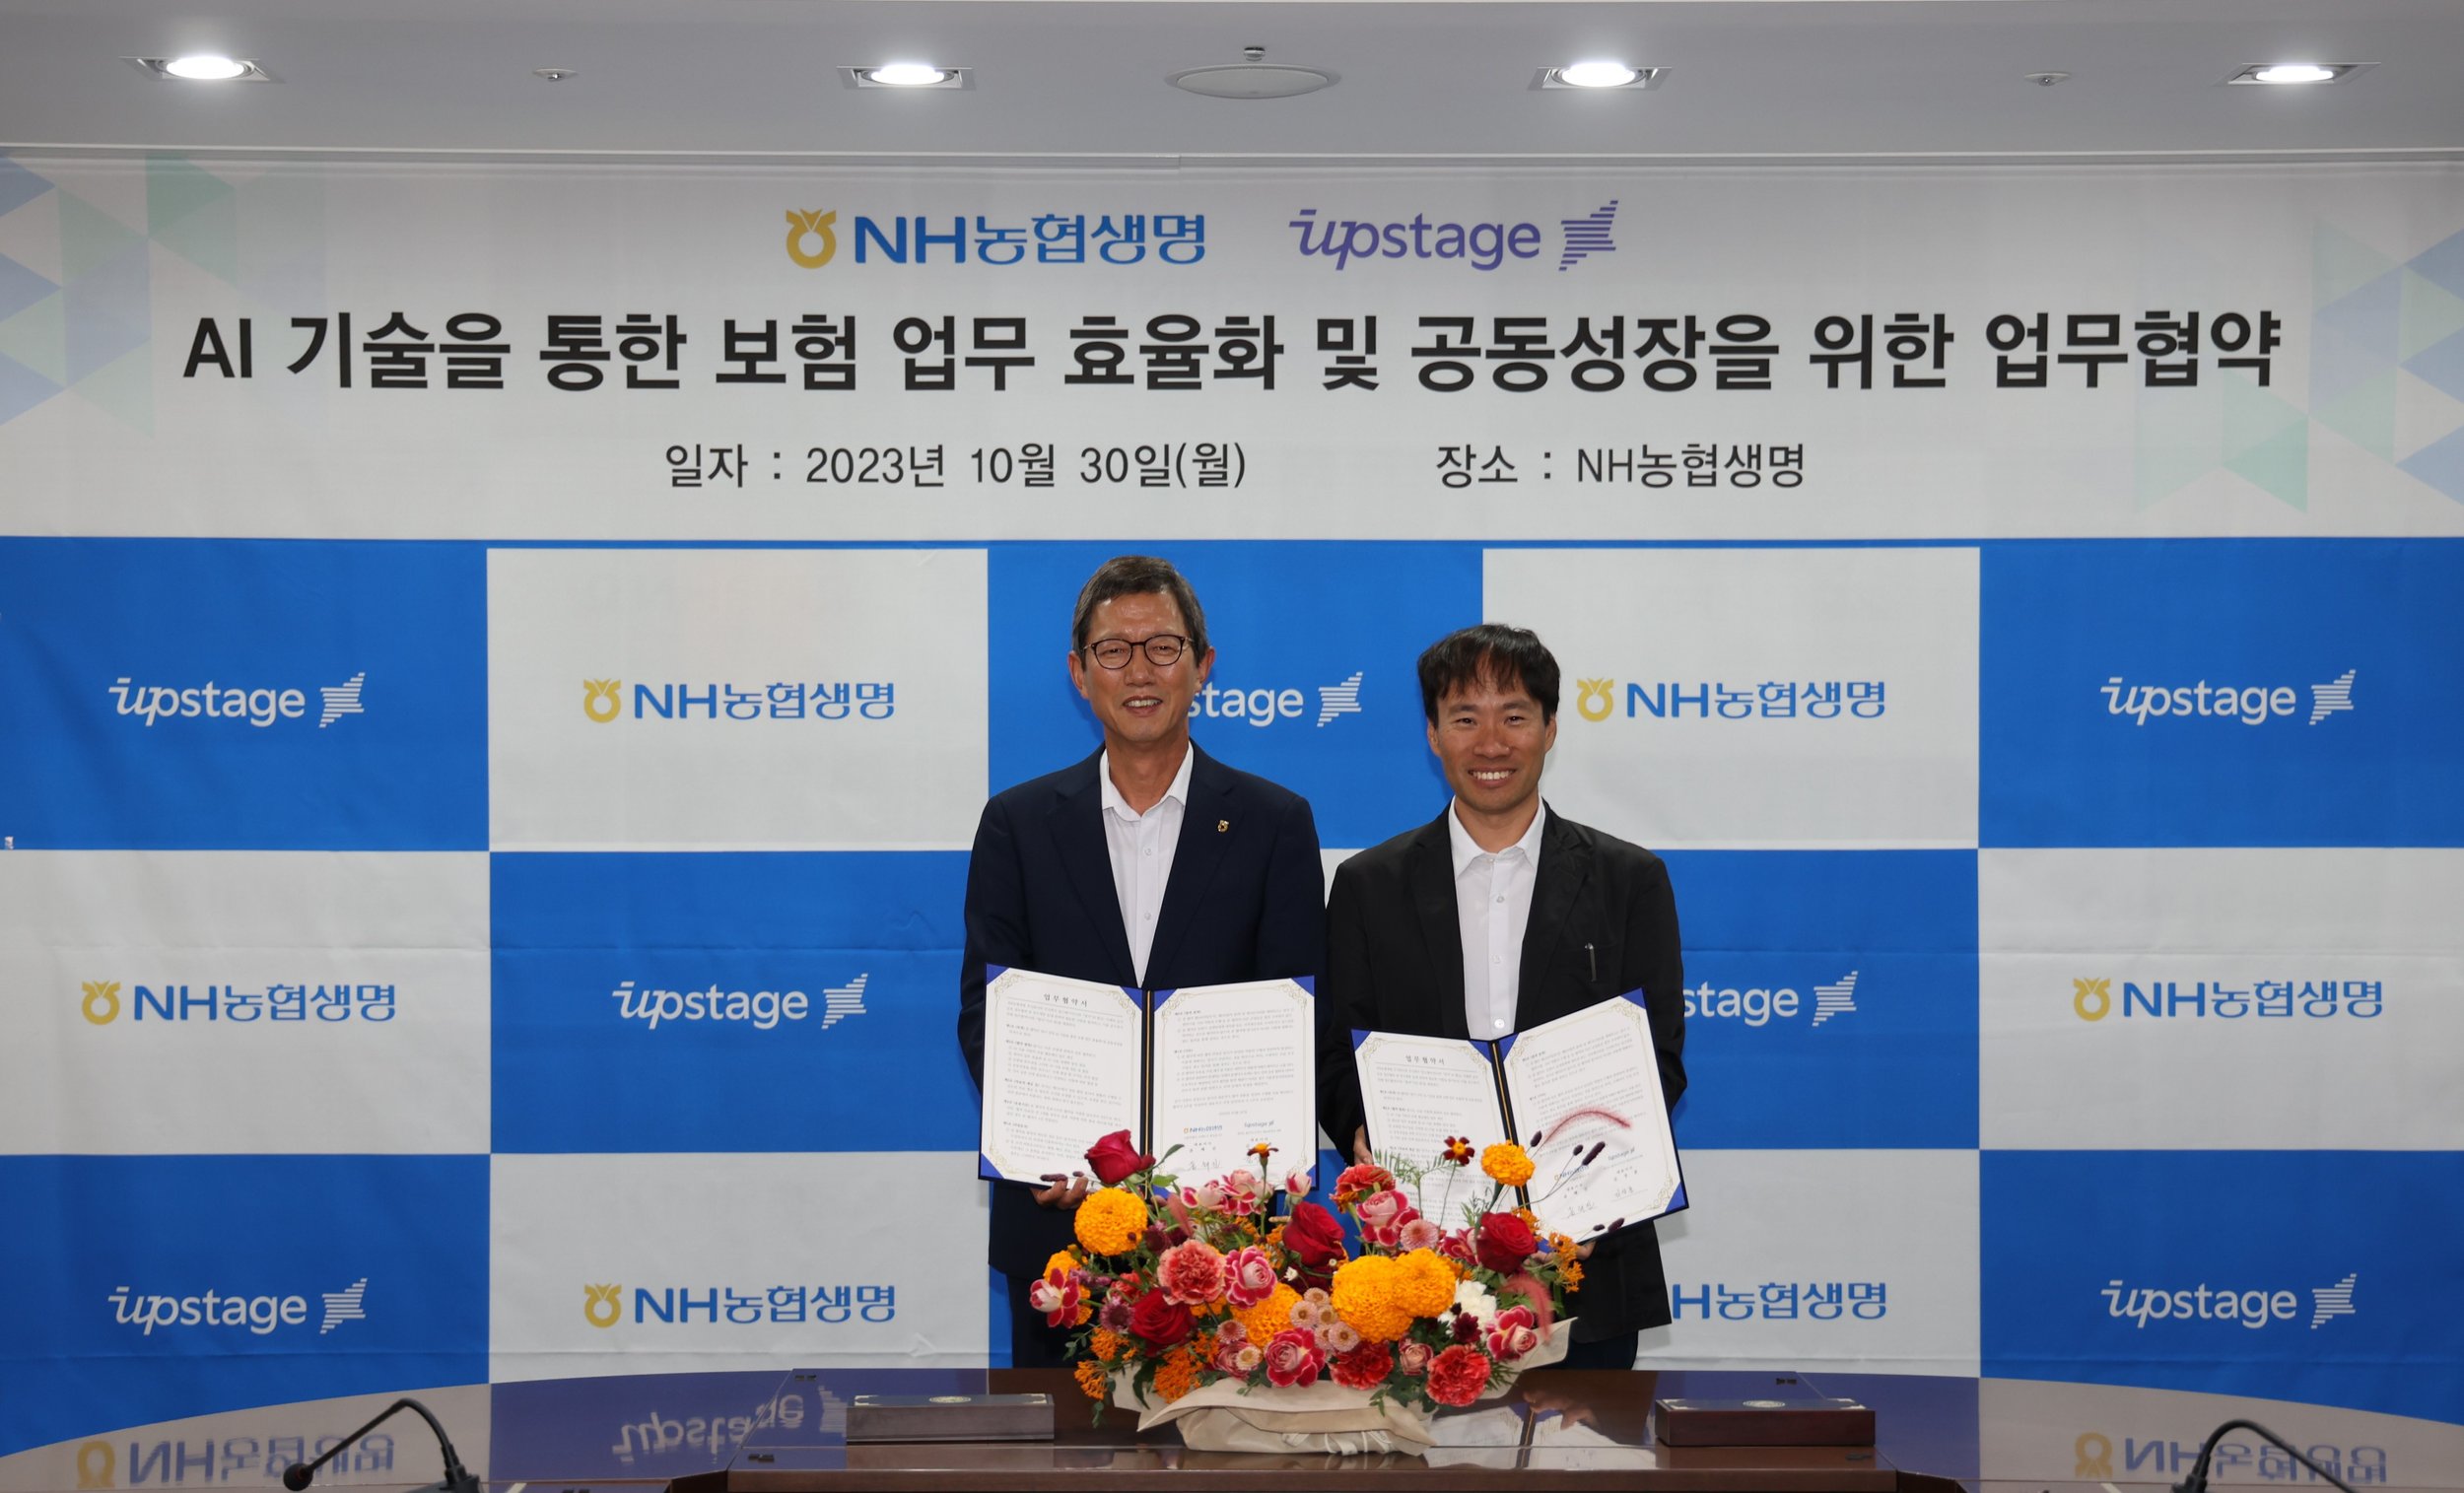 UPSTAGE SIGNS FINANCIAL AI INNOVATION BUSINESS AGREEMENT WITH NH NONGHYUP LIFE INSURANCE